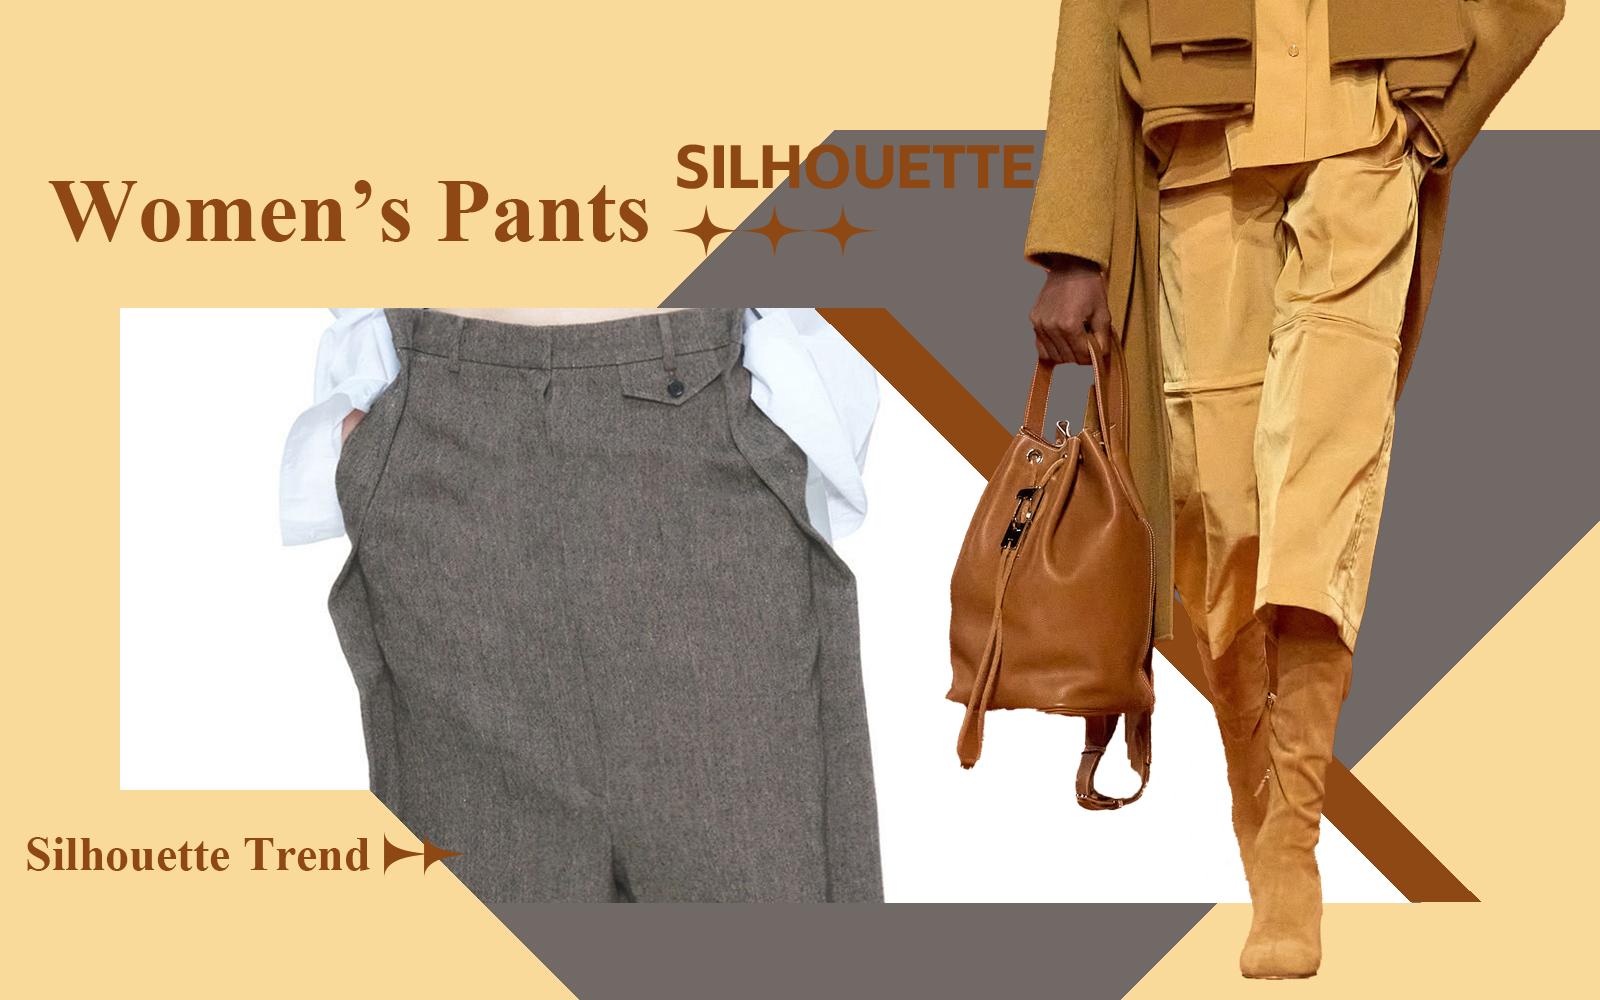 Classic Reconstruction -- The Silhouette Trend for Women's Pants